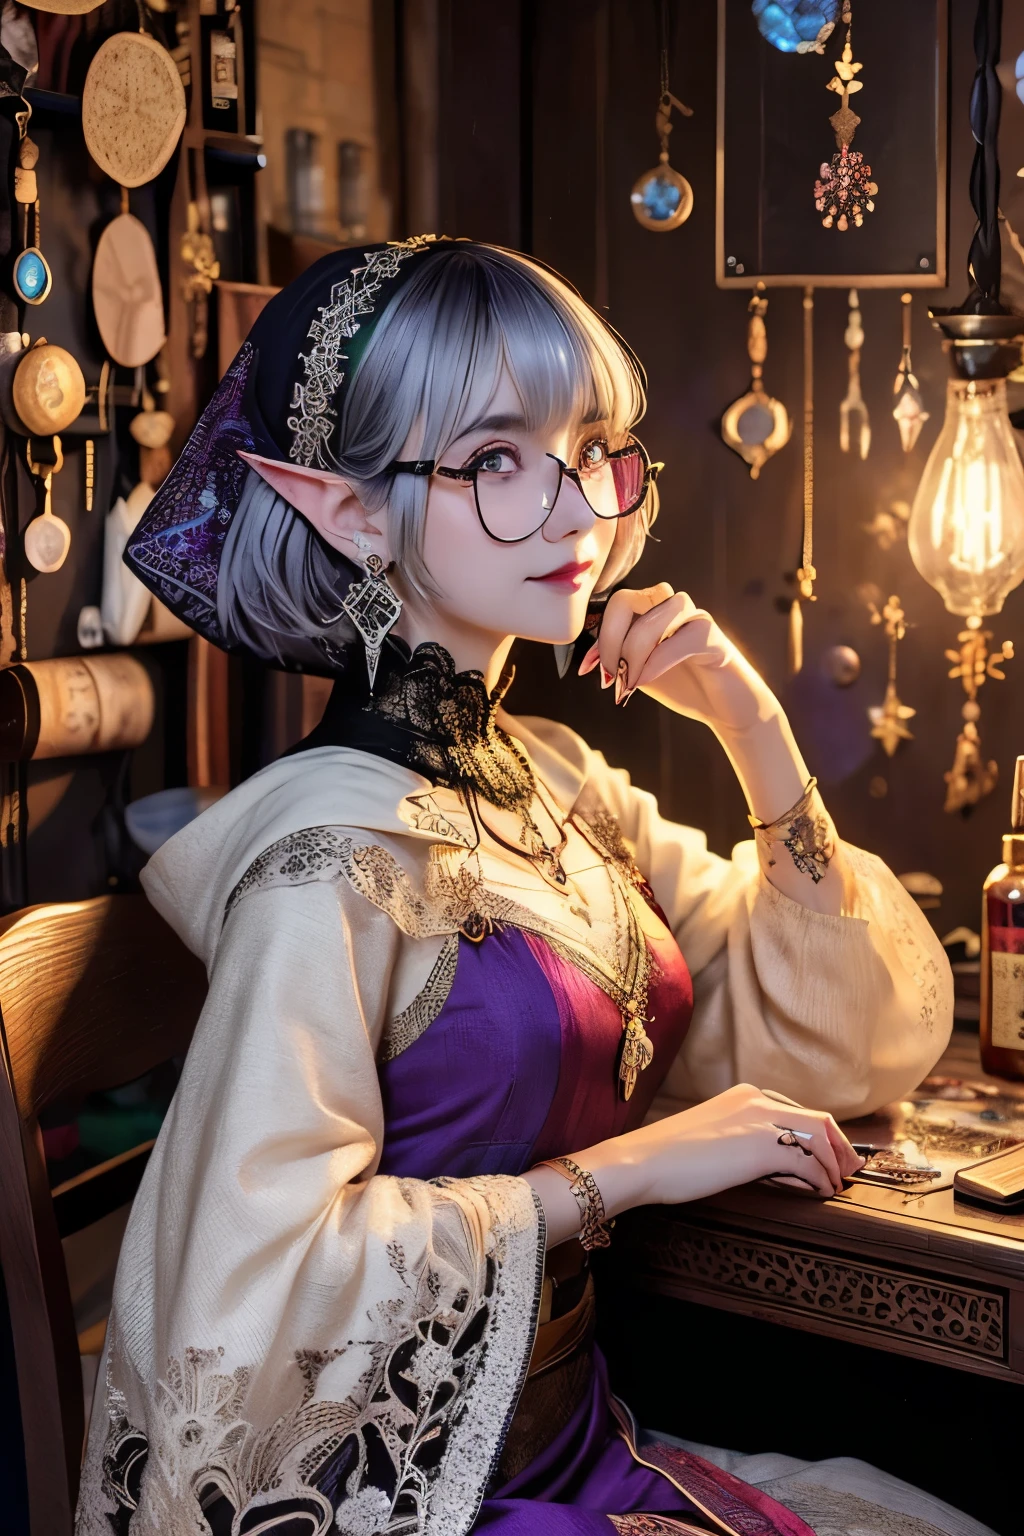 (Ultra-detailed face, smiles smugly), (Fantasy Illustration with Gothic & Ukiyo-e & Comic Art), (A middle-aged dark elf woman with silver hair, blunt bangs, very long disheveled hair, and dark purple skin, lavender eyes), (She is wearing an orange sari with a geometric, Victorian, sequined, embroidered, lace and gauze hood. She wears one pair of glasses, earrings, necklace, and ring made of gems and precious metals), BREAK (She sits in a gothic wooden chair, one hand touching one of the glasses, pointing to the medicine bottles on the desk), BREAK (On a wooden desk is a collection of medicine bottles, herbs, and magical objects, and on the wall hangs a tapestry with constellations of stars)